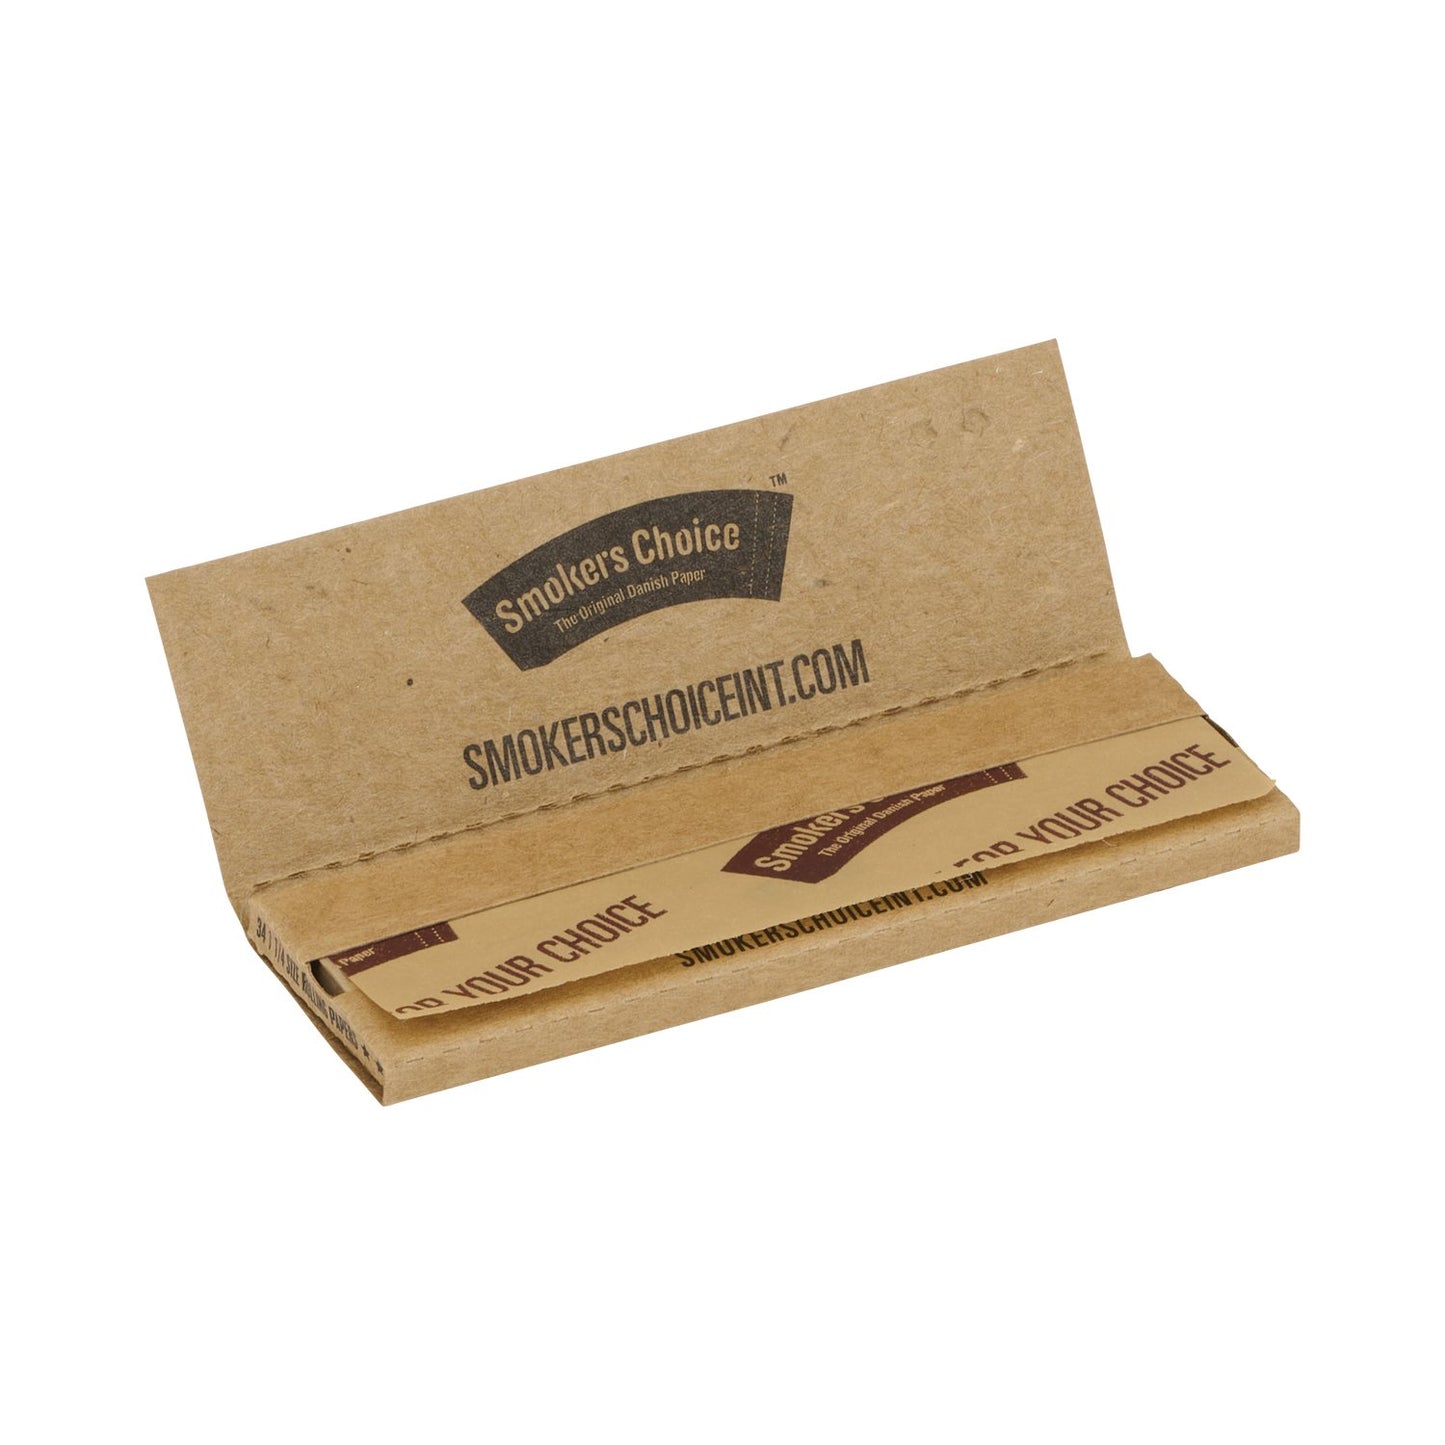 Rolling Paper Brown 1,25 size